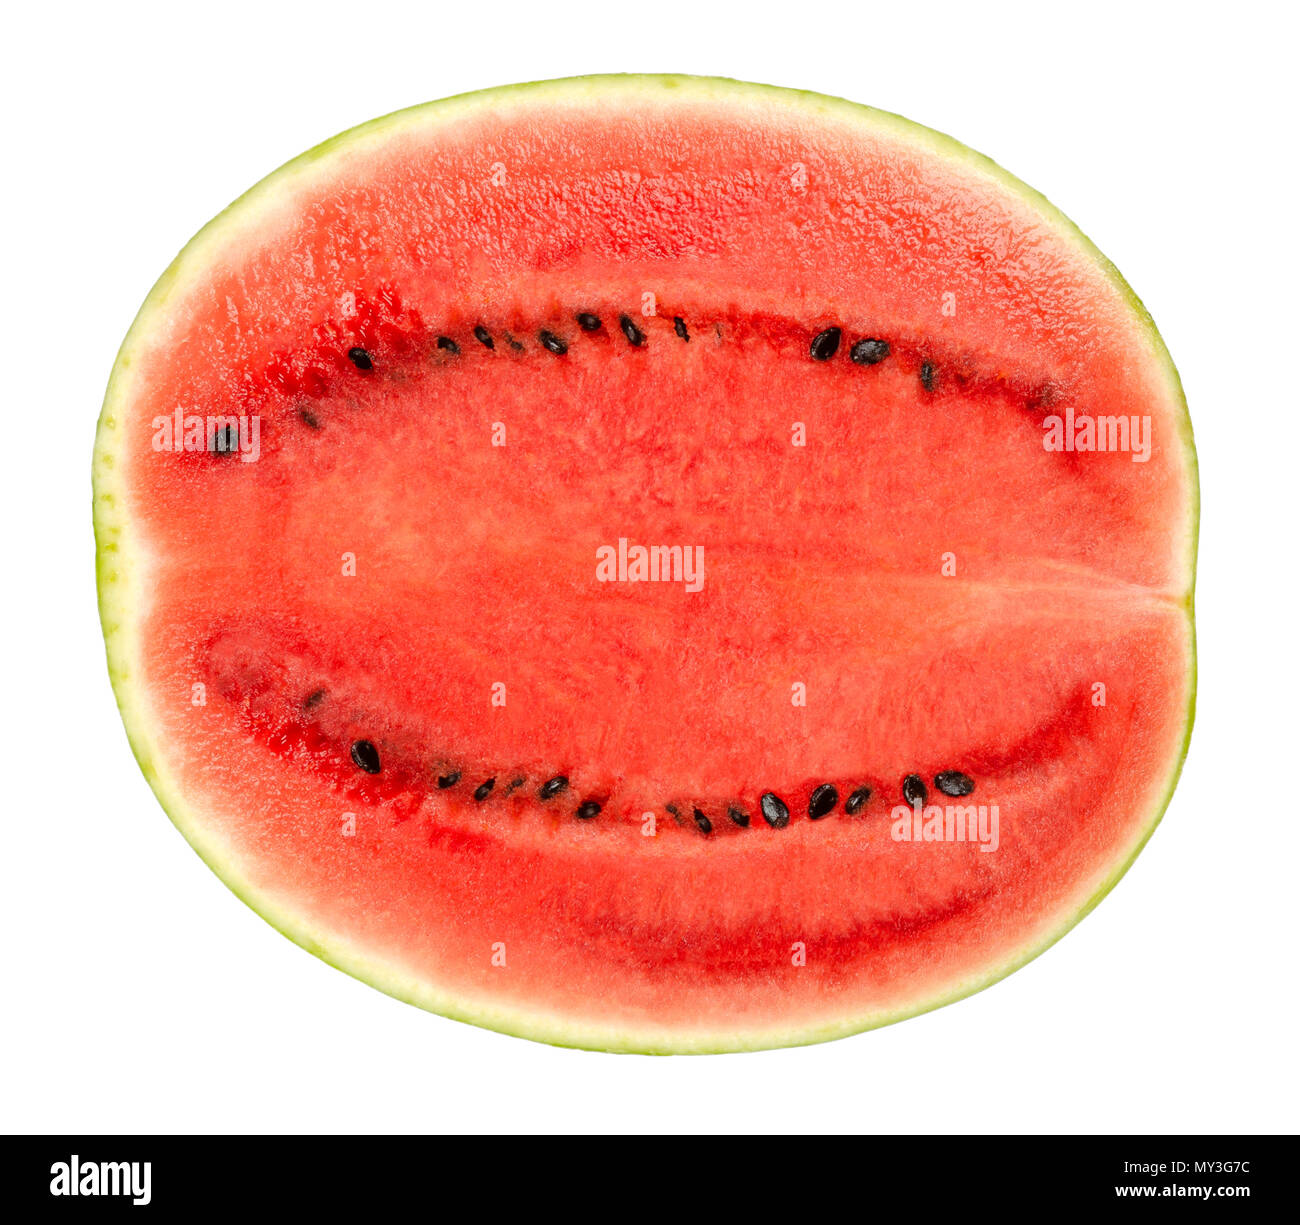 Sweet watermelon half, cross section, front view, isolated on white background. Ripe fruit of Citrullus lanatus with green striped skin, red pulp. Stock Photo